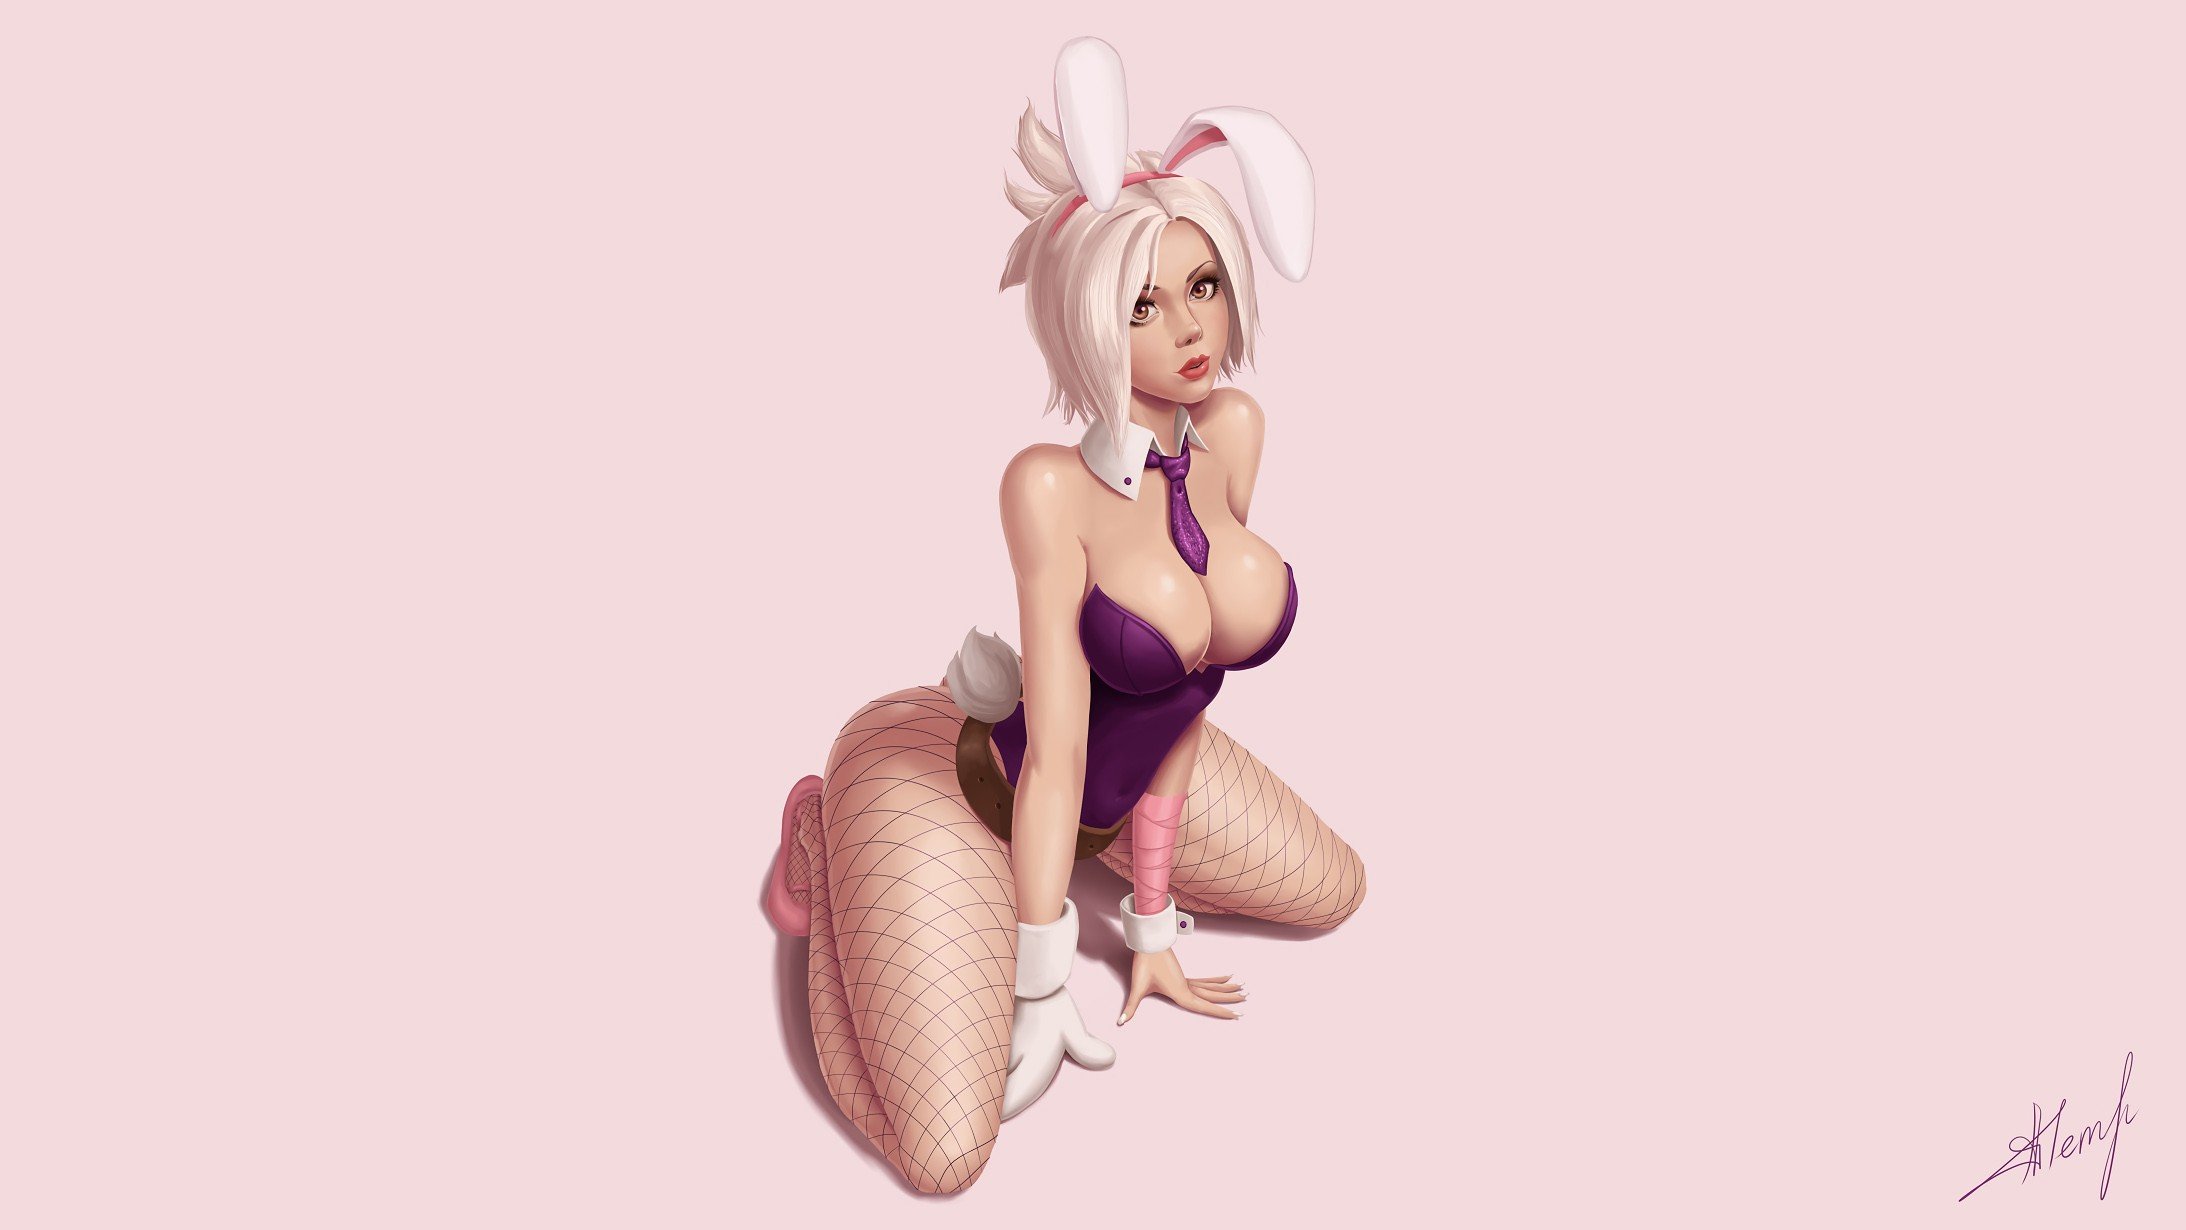 Submissive blond bunny girl gets brutal pic